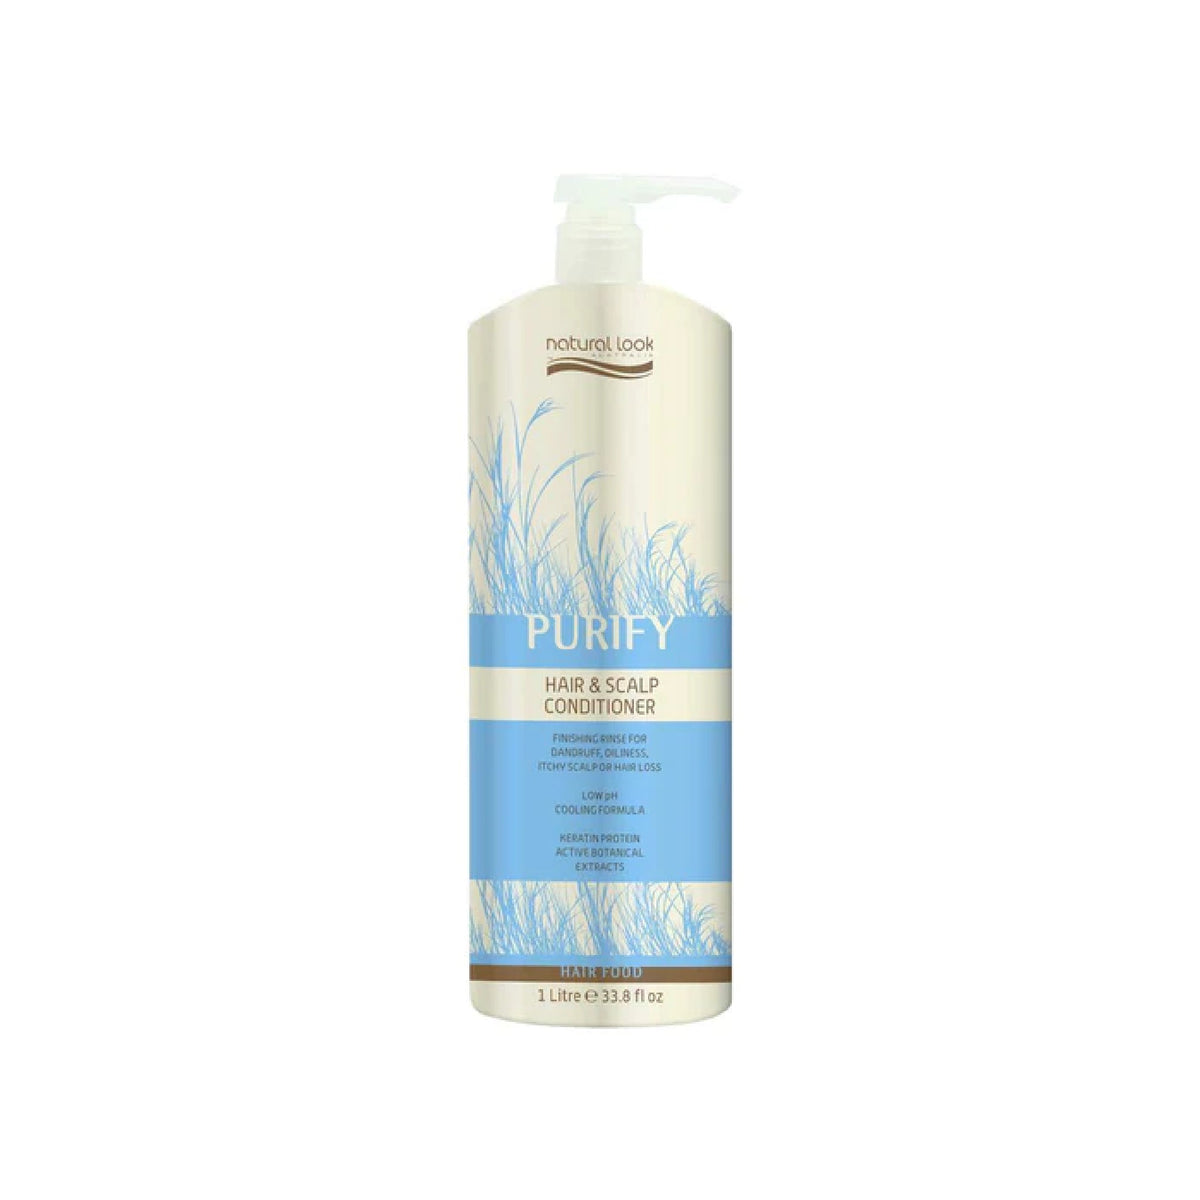 Natural Look Purify Hair & Scalp Conditioner 1Ltr - Haircare Superstore